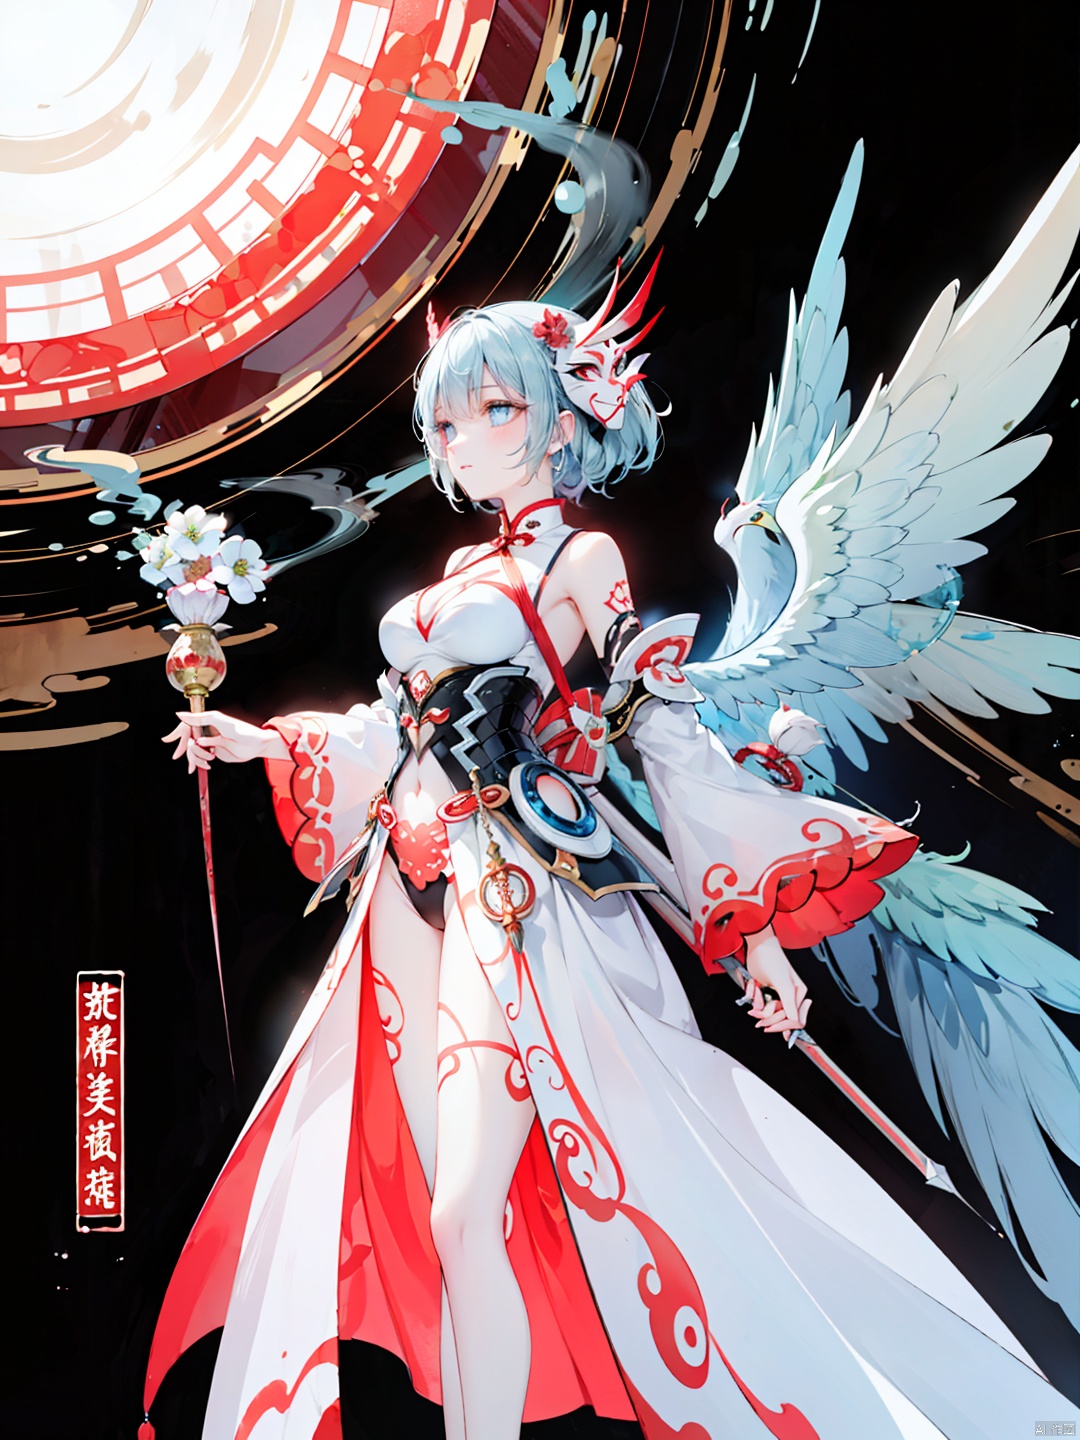  Surrounded by rotating transparent red scrolls, floating transparent red Chinese characters, dynamic, rotating, 1 girl standing in the air, not looking at the camera, writing calligraphy, solo, blue eyes, holding, weapon, holding weapon, glow, robot, mecha, science fiction, open_hand,movie lighting, strong contrast, high level of detail, best quality, masterpiece,heigirl,crystal_dress , crystal , wings,guijian, flowing skirts,（smoke）,Giant flowers, tattoo, mask, greendesign, Ink painting, Hourglass body shape, lora_eyes10, zgct color